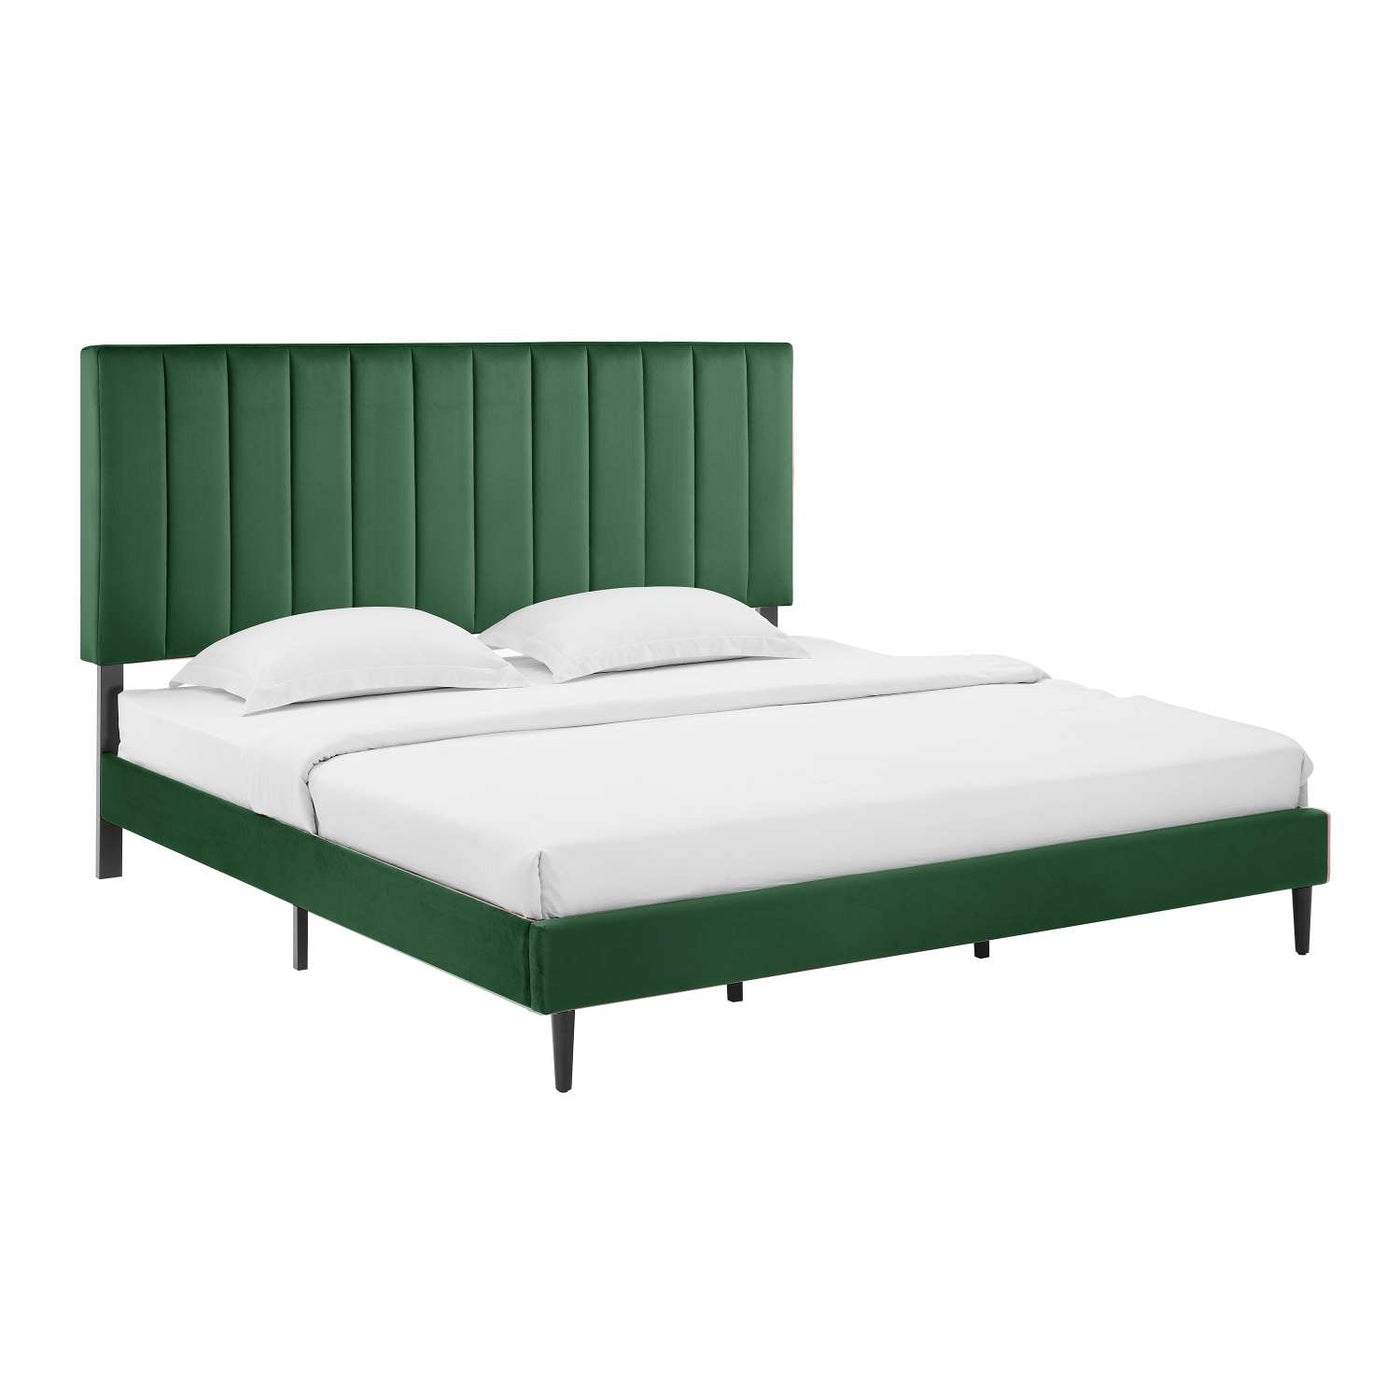 Kalina 3-Piece King Bed - Forest Green